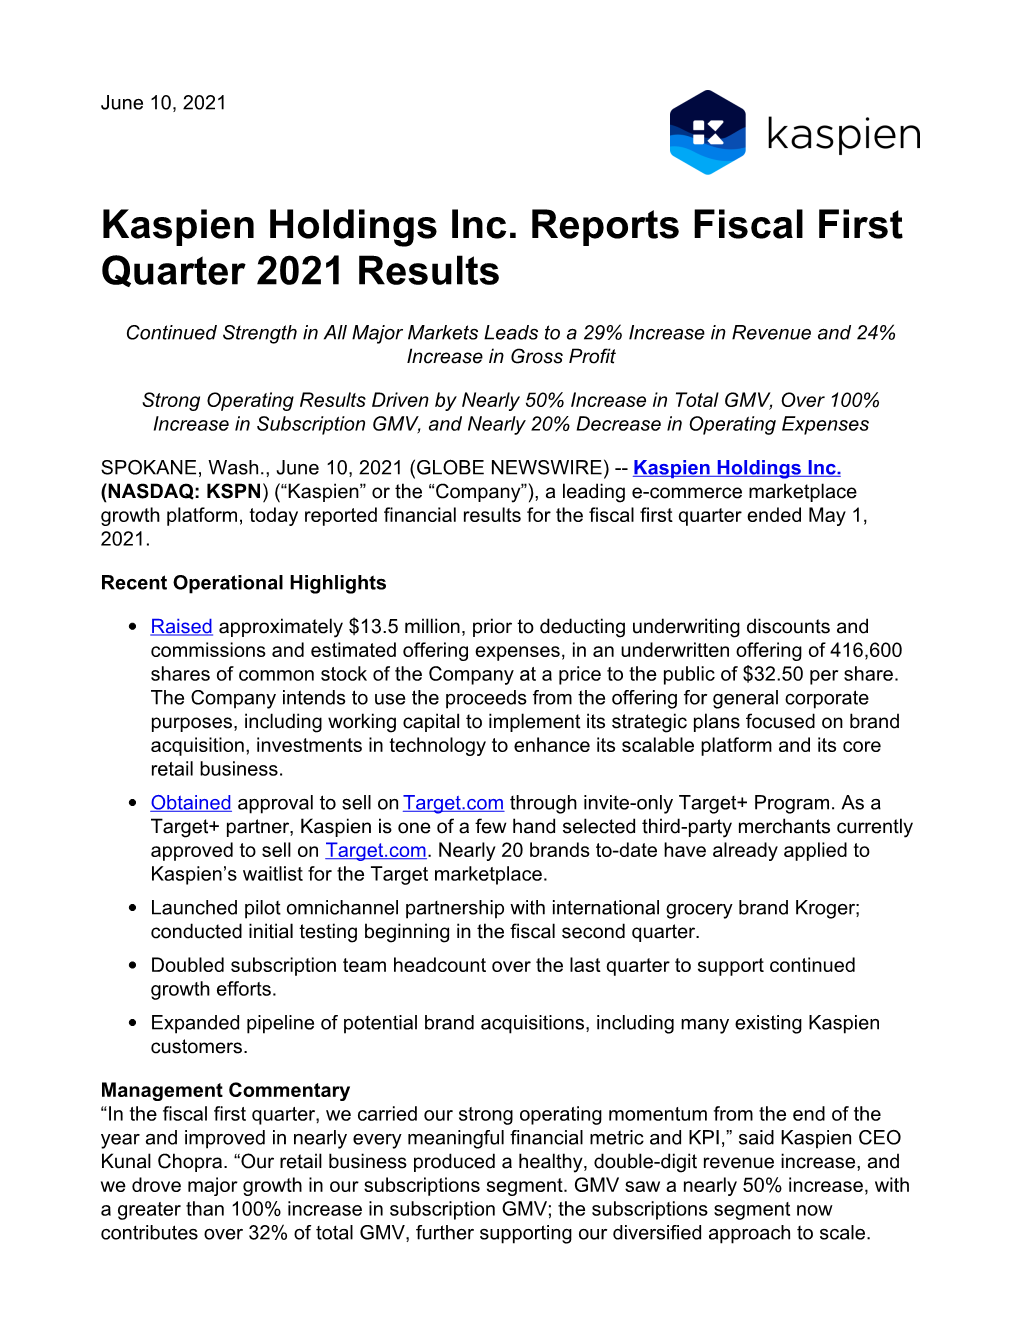 Kaspien Holdings Inc. Reports Fiscal First Quarter 2021 Results